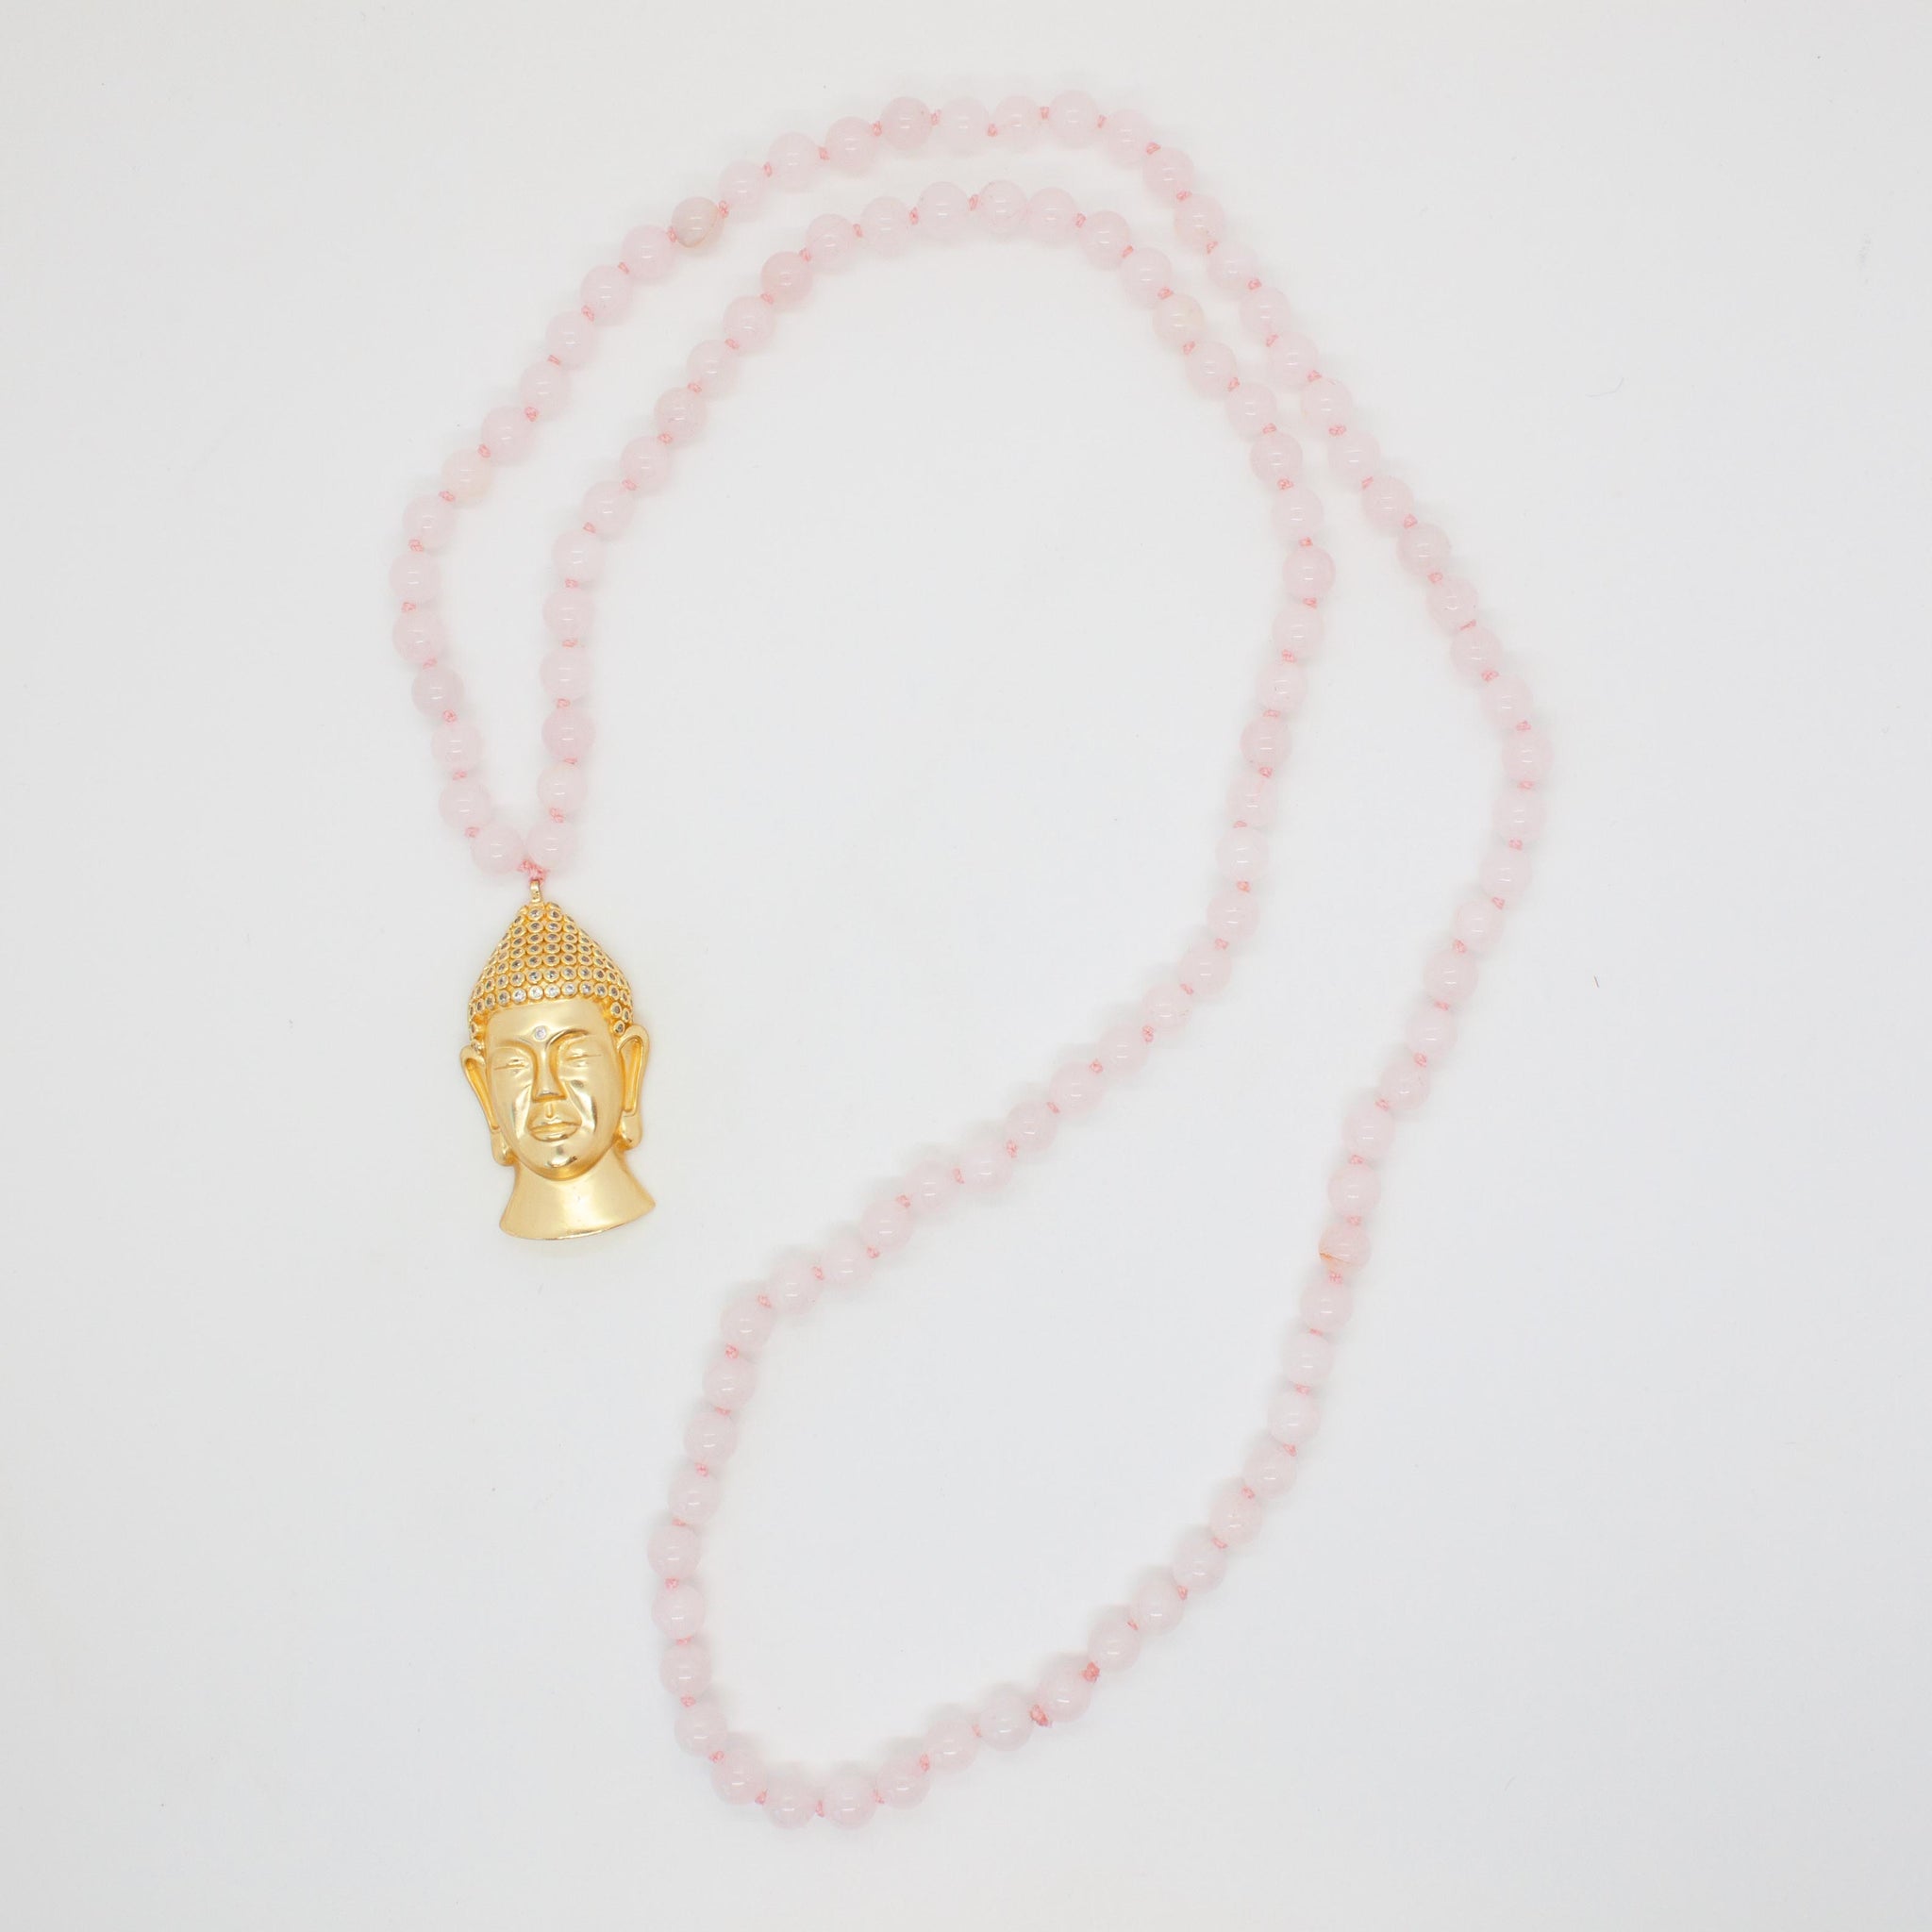 For LOVE of opening your heart to promote self-love, friendship, deep inner healing and feelings of peace. 30 inch hand knotted rose quartz mala (108 beads) with silver and gold buddha pendant. Handmade in Toronto kp jewelry co.